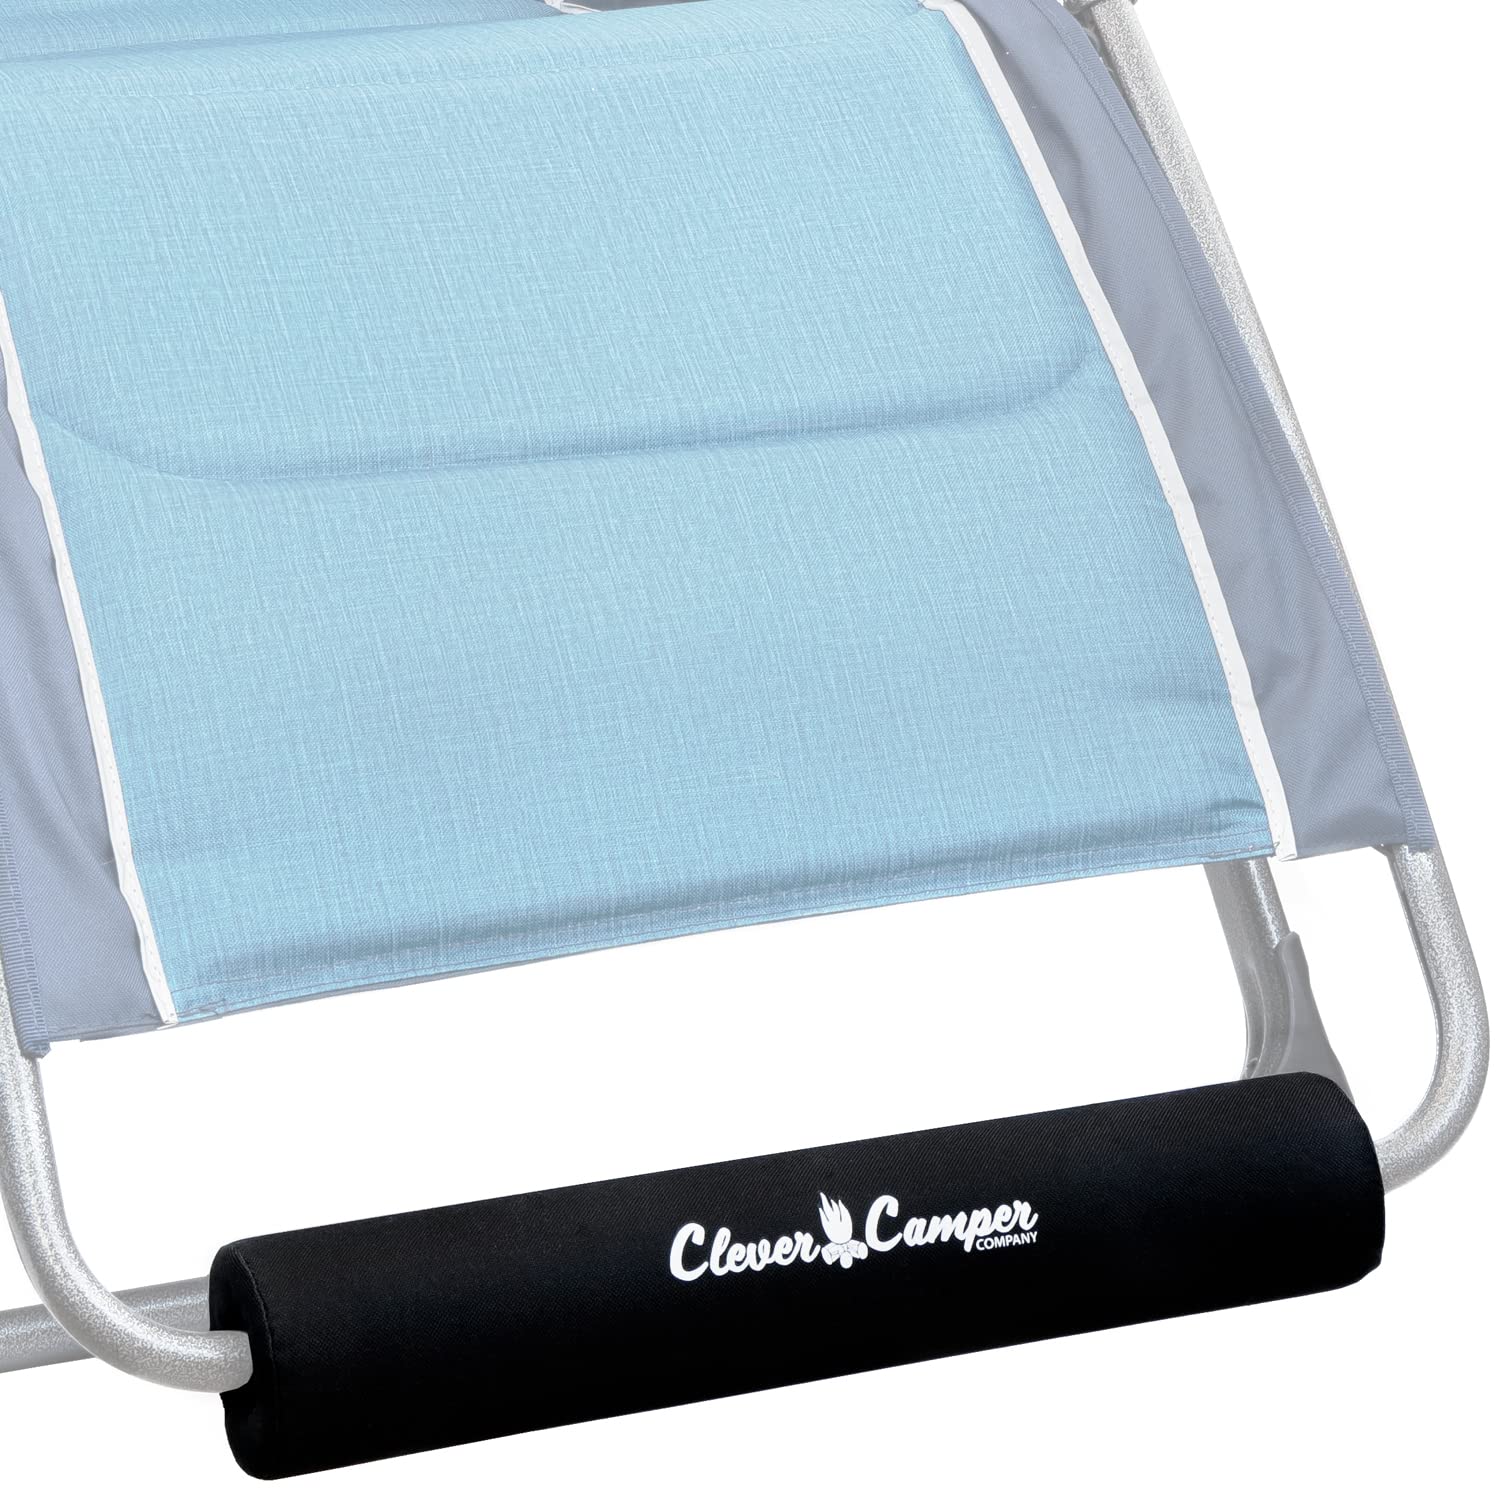 Clever Camper Compan FRC002 The Original Zero Gravity Chair Cushion For Foot  Rest Allows You To Relax In Total Comfort - Great For Antigravity Outdoor  Recli